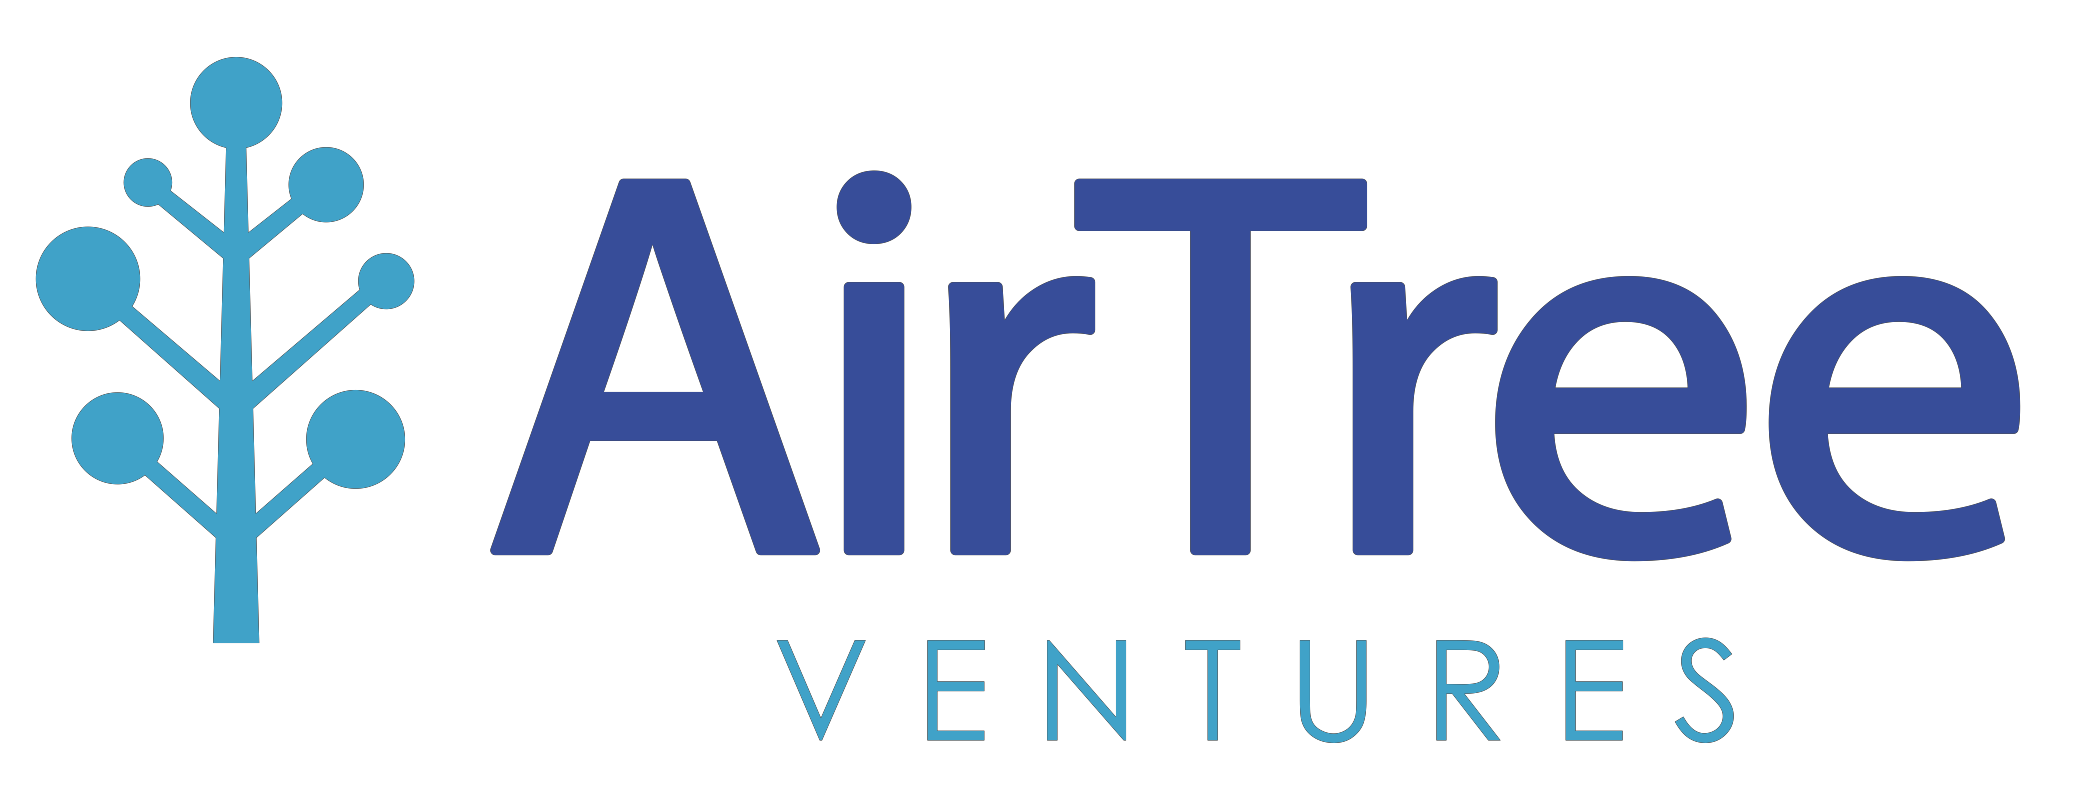 airtree-ventures.png